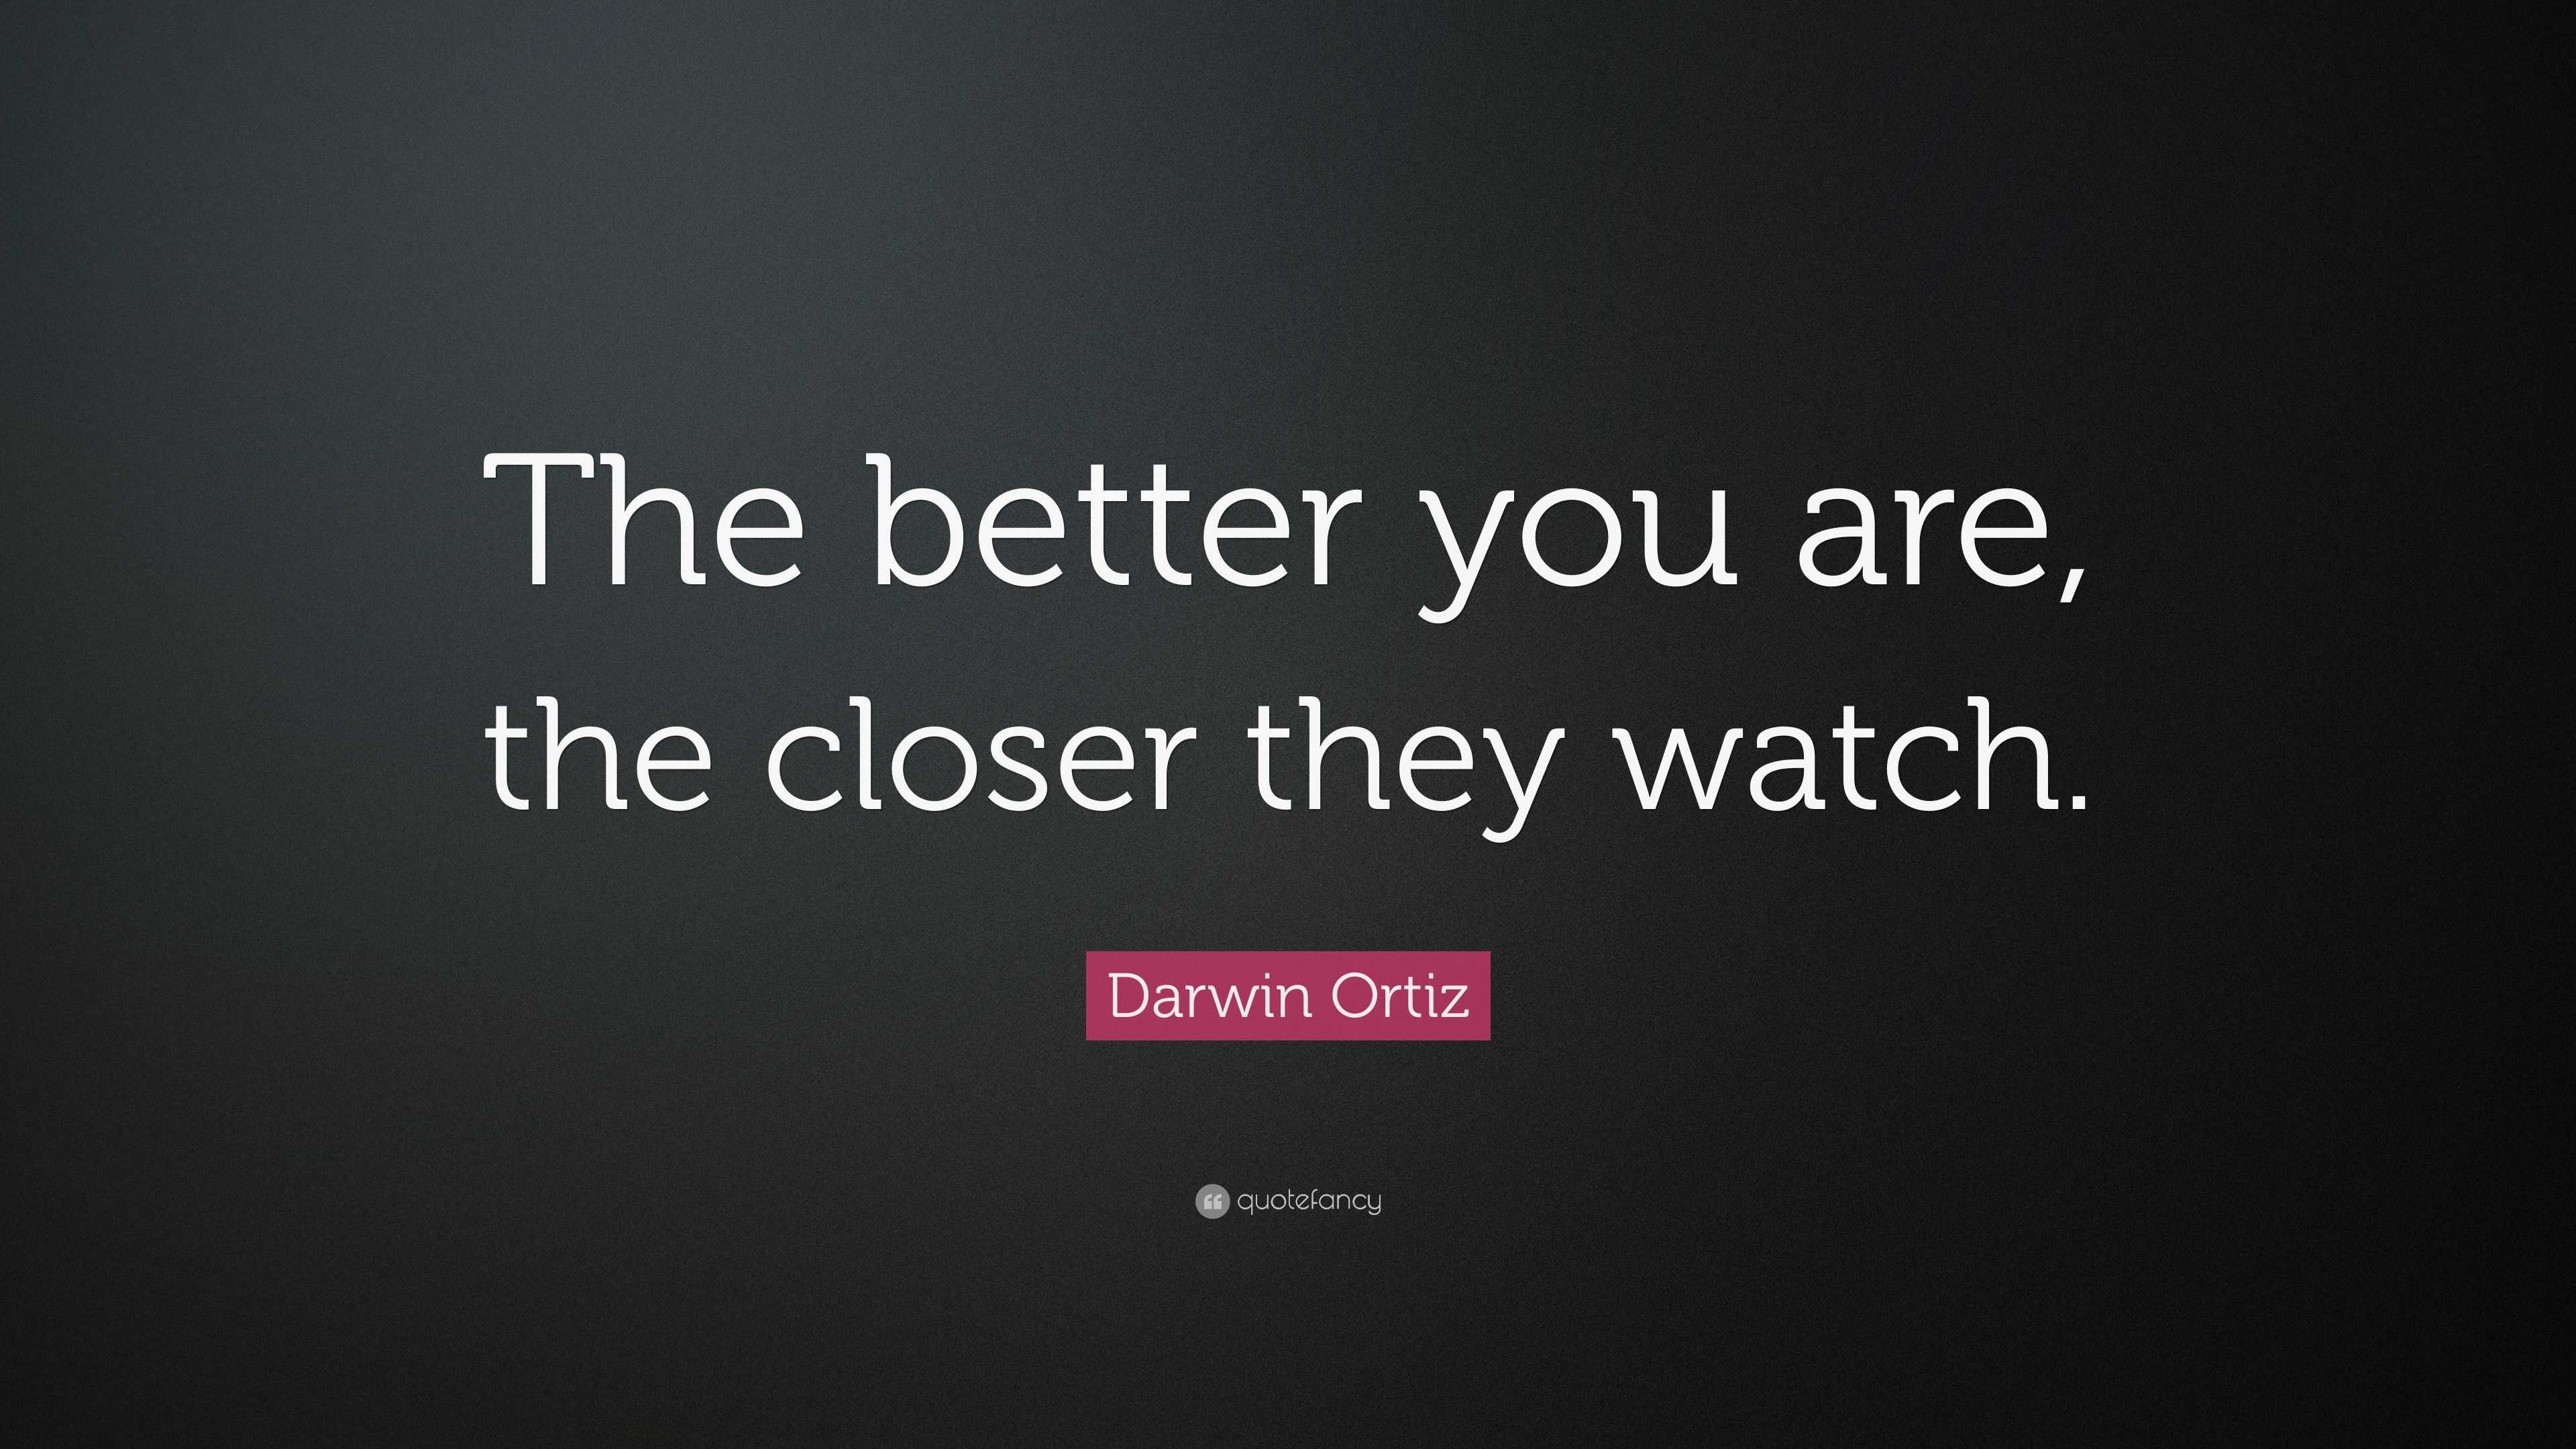 3258118 Darwin Ortiz Quote The better you are the closer they watch